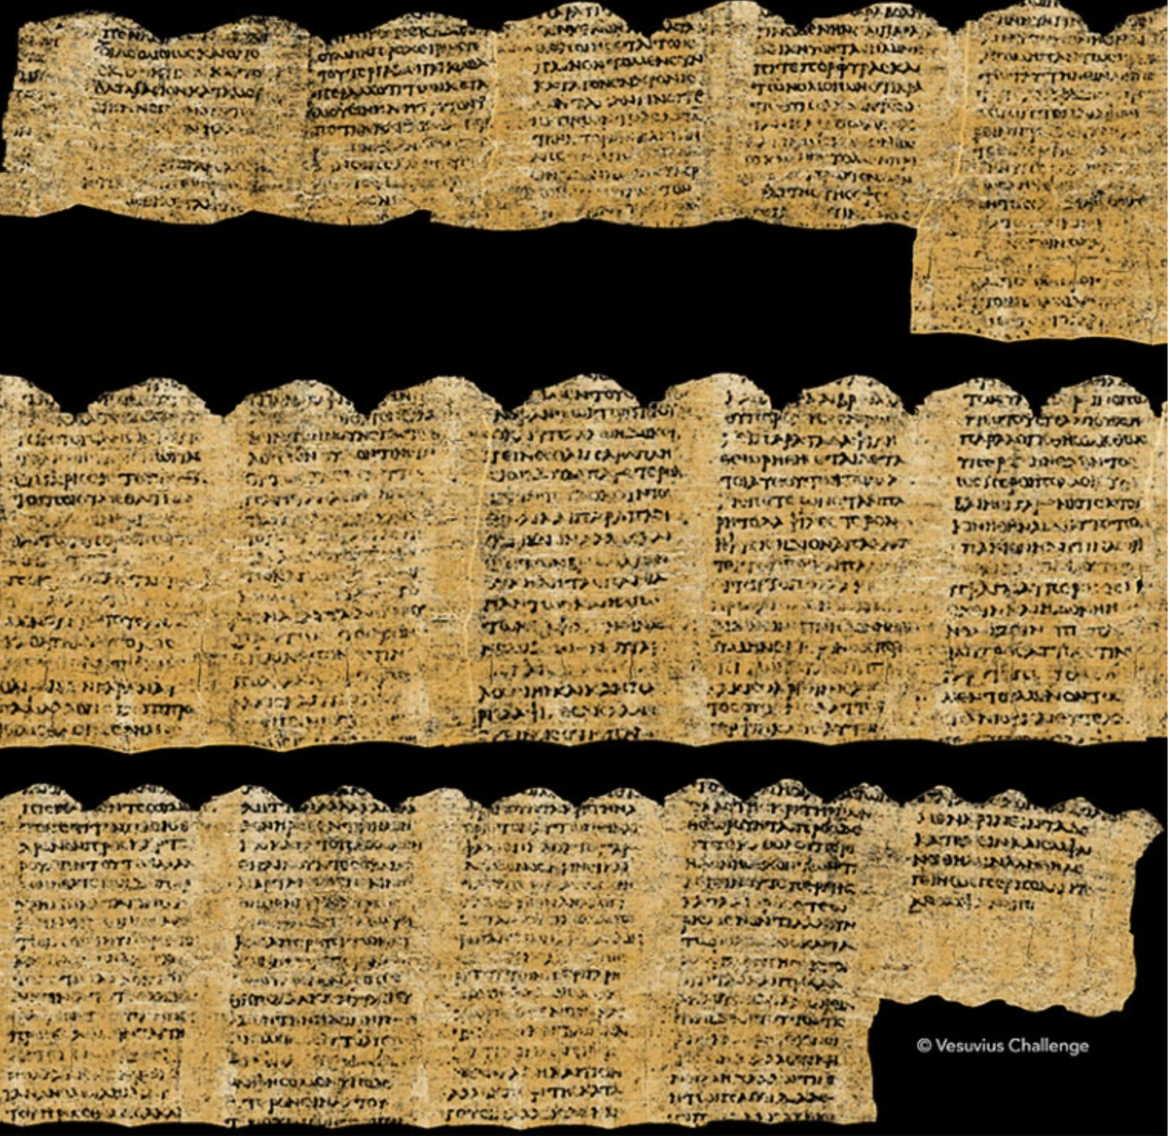 Essay on pleasure revealed in ancient scroll